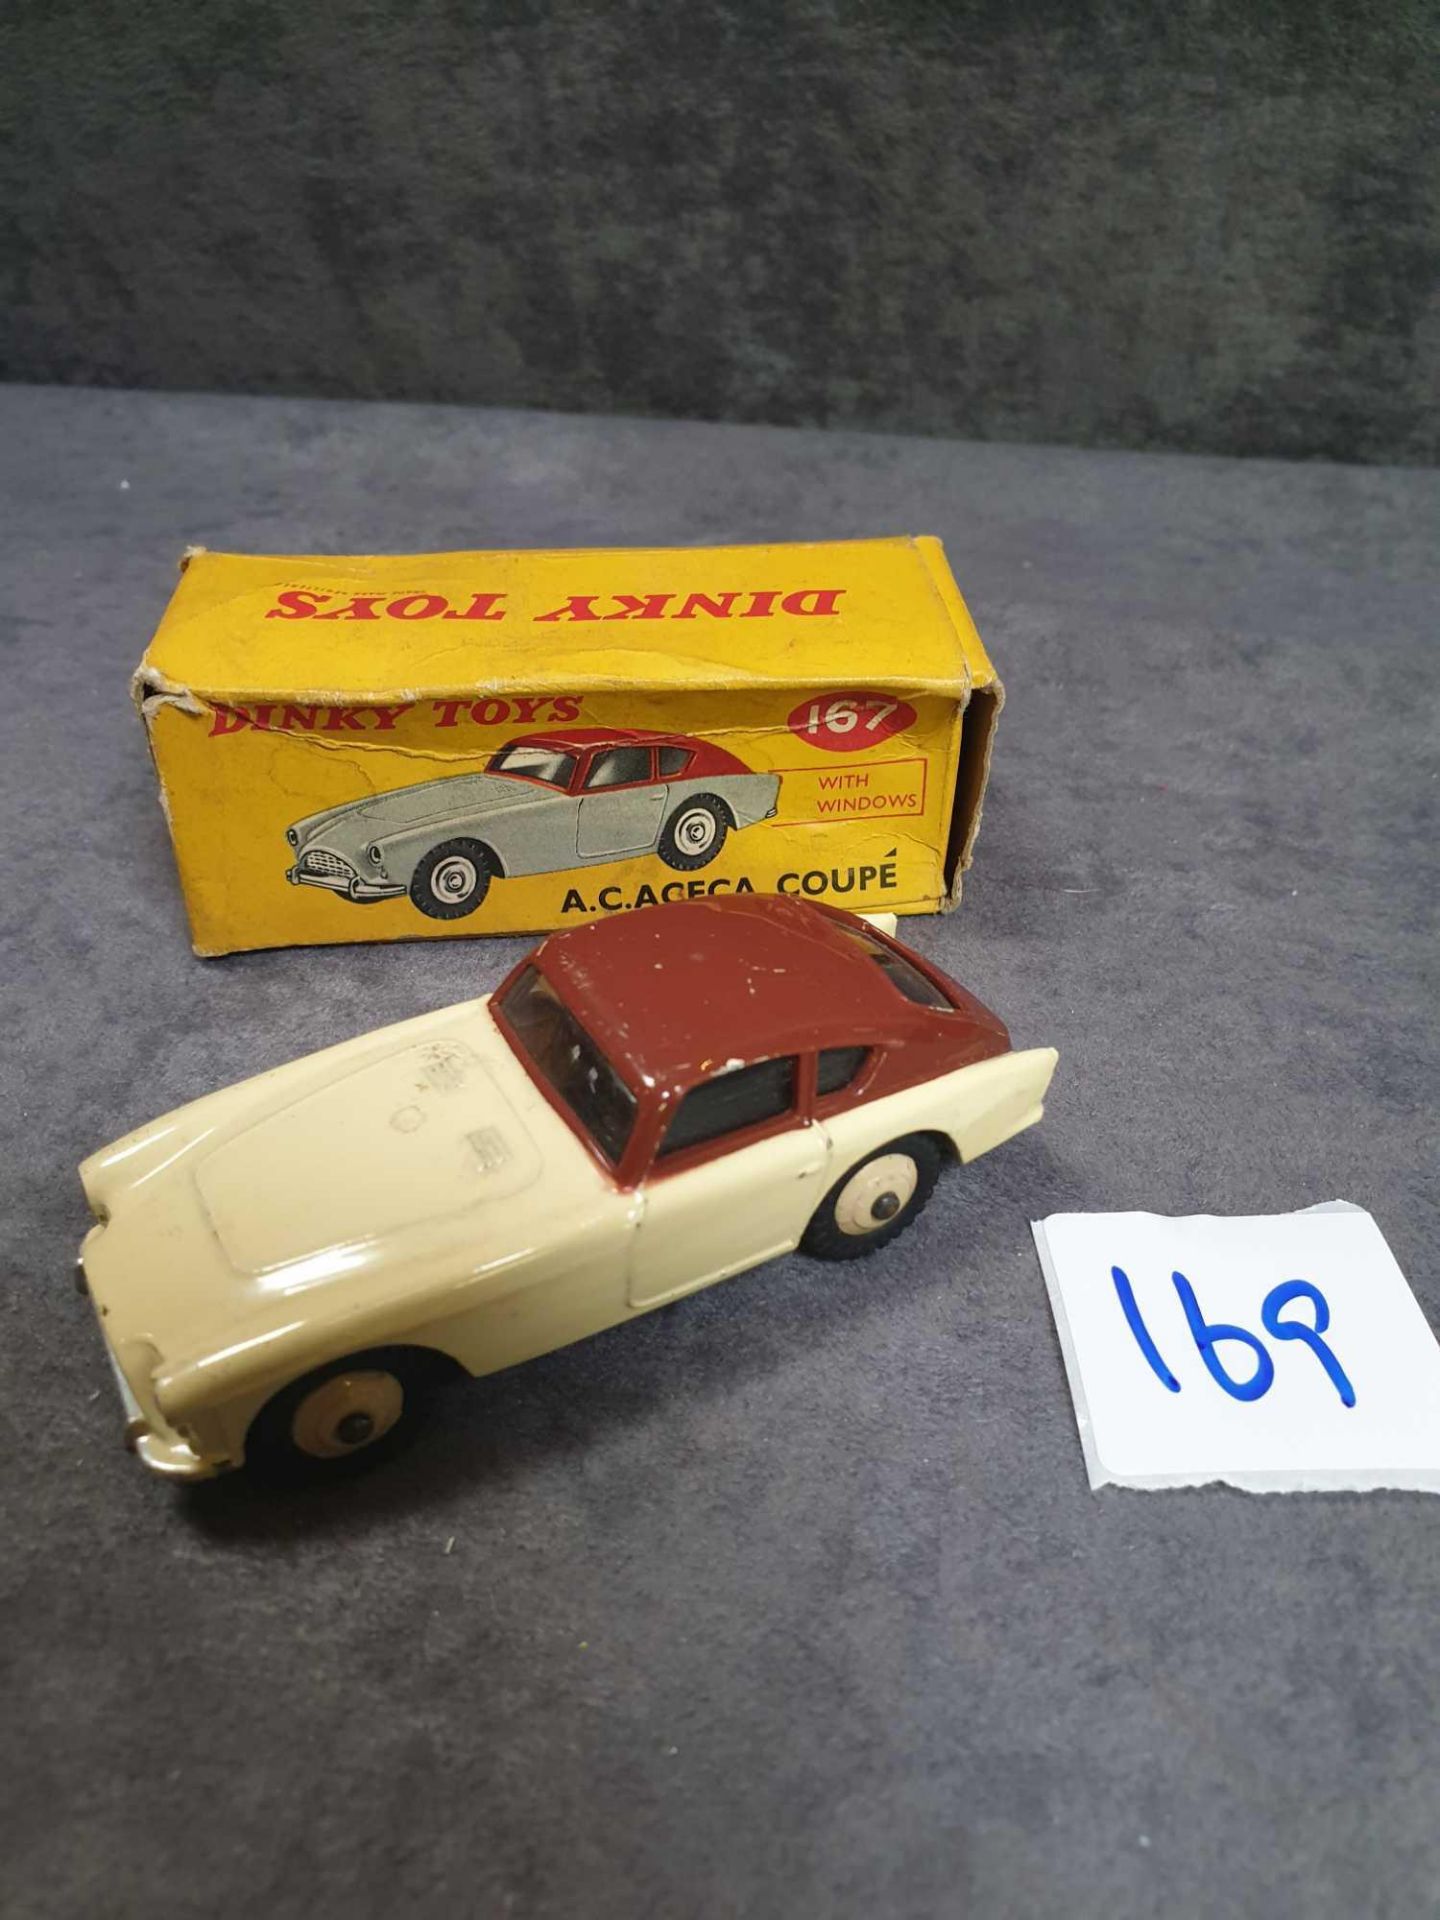 Near Mint Dinky Diecast #167 A C Aceca Coupe Cream and Brown roof and cast hubs 1/43 scale in box (